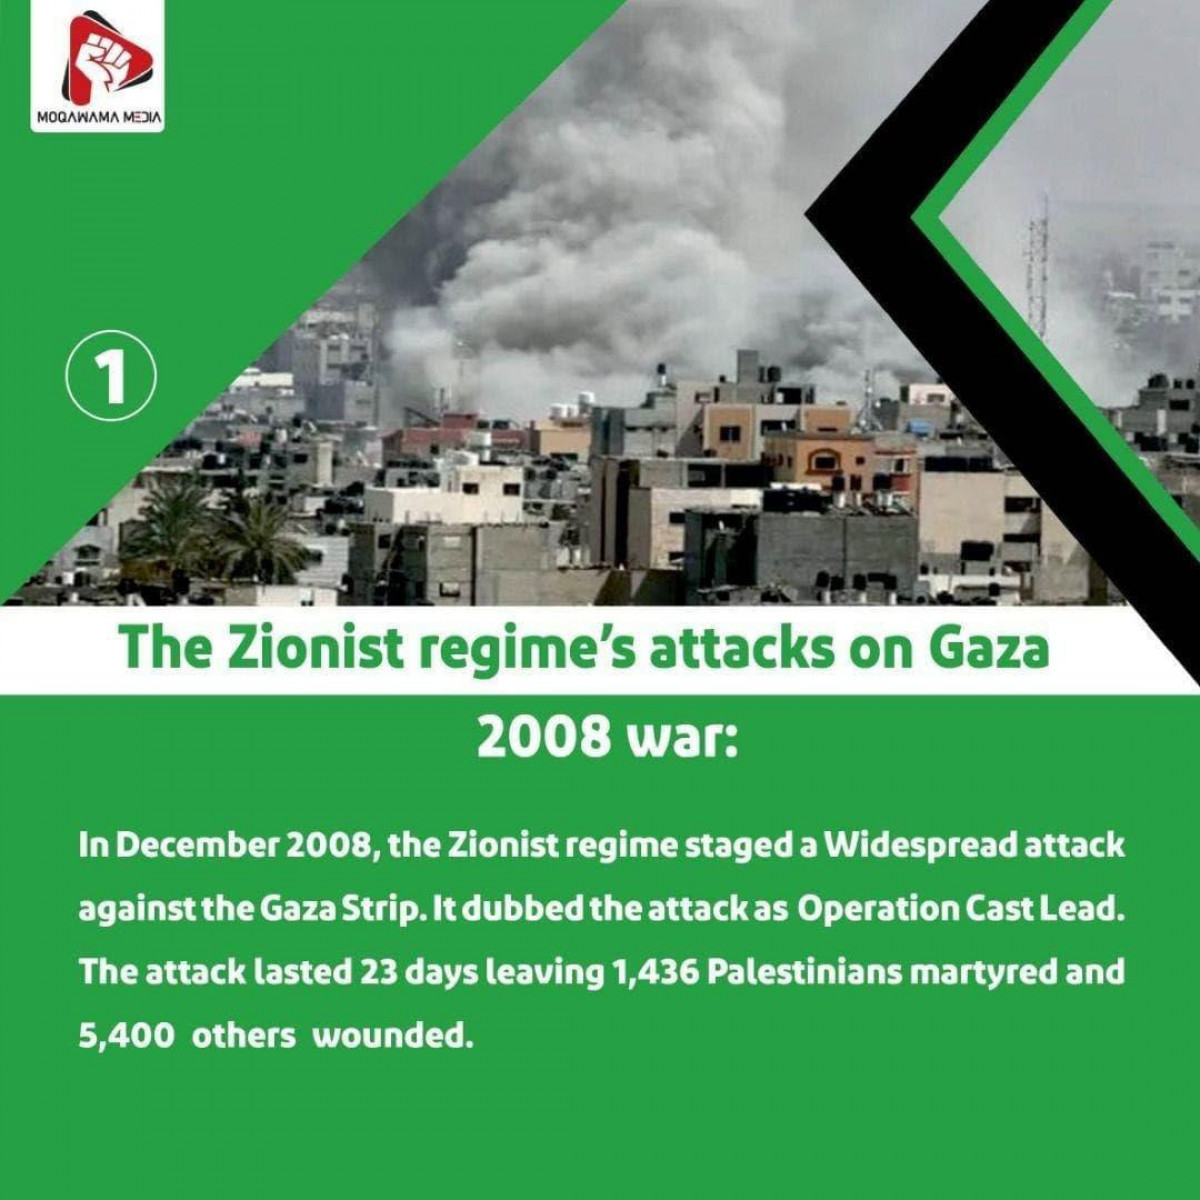 Collection of posters: The Zionist regime's attacks on Gaza 2008 war